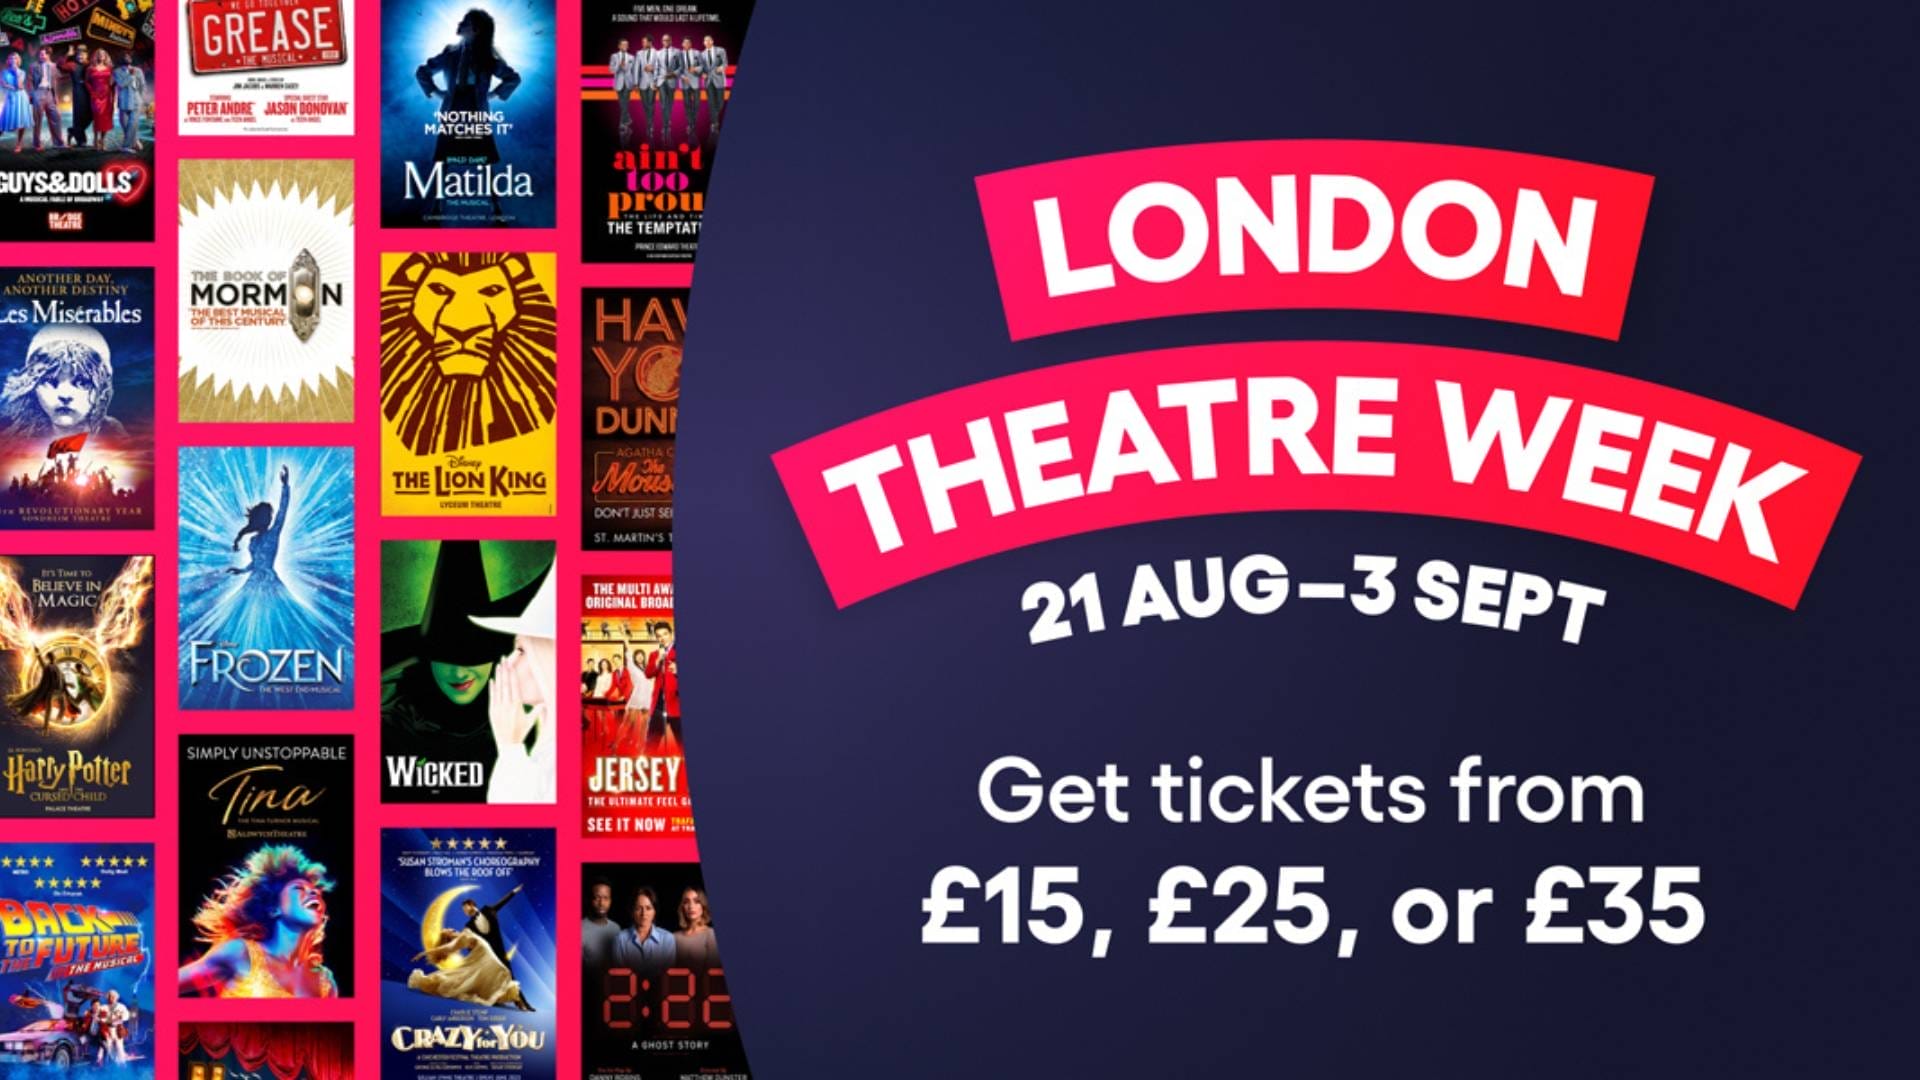 London Theatre Week Returns Offering £15 Tickets for West End Shows